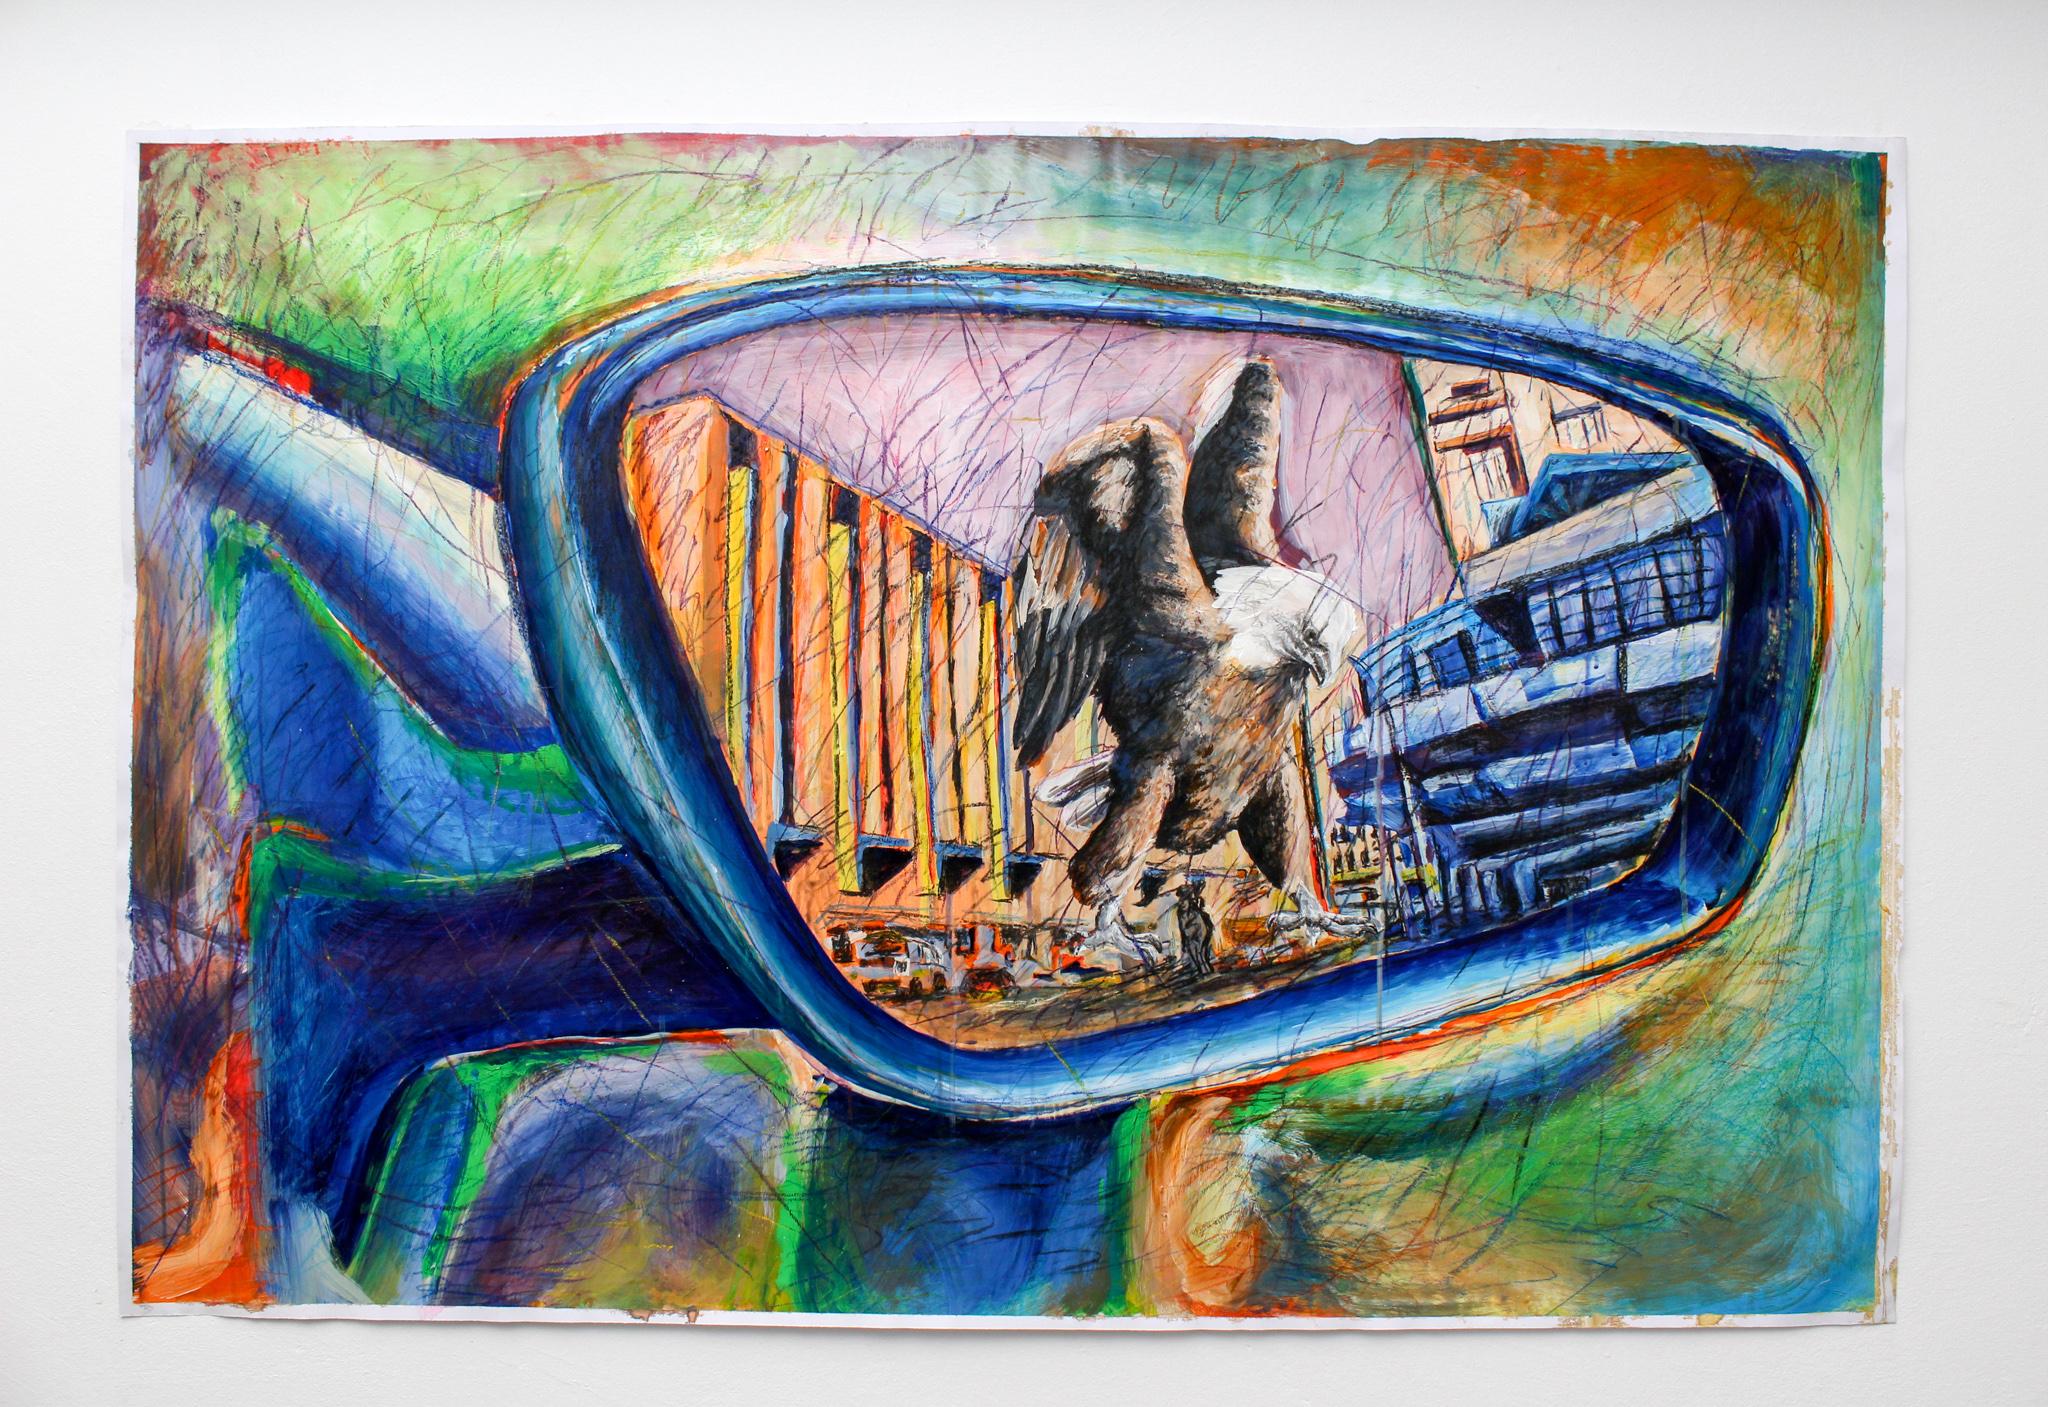 The eye of vision , Fillipus Sheehama, Acrylic paint, Pastel, Charcoal on paper